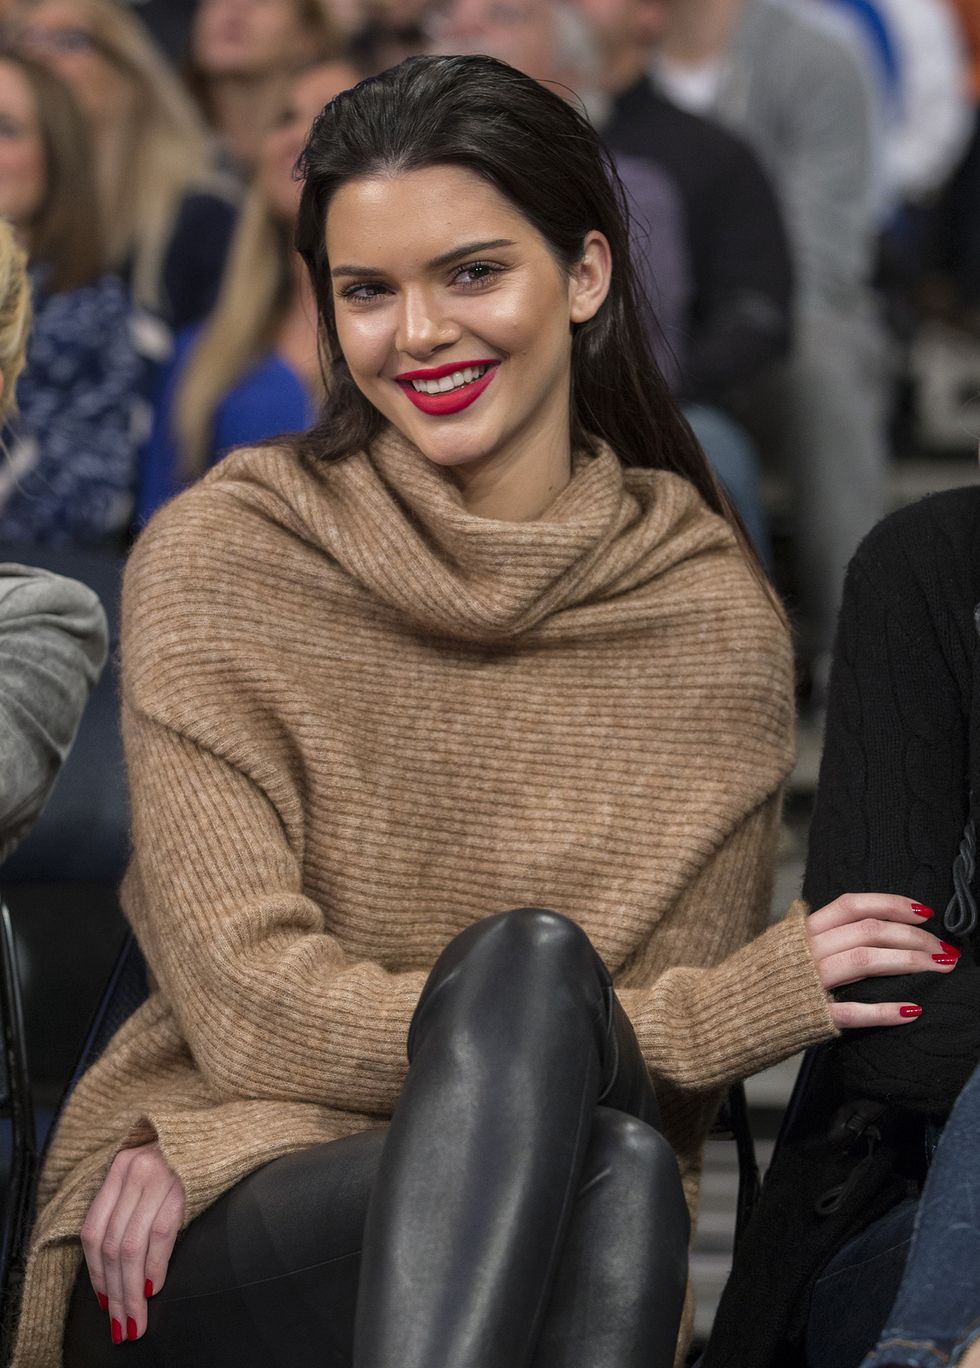 Kendall Jenner at a basketball game